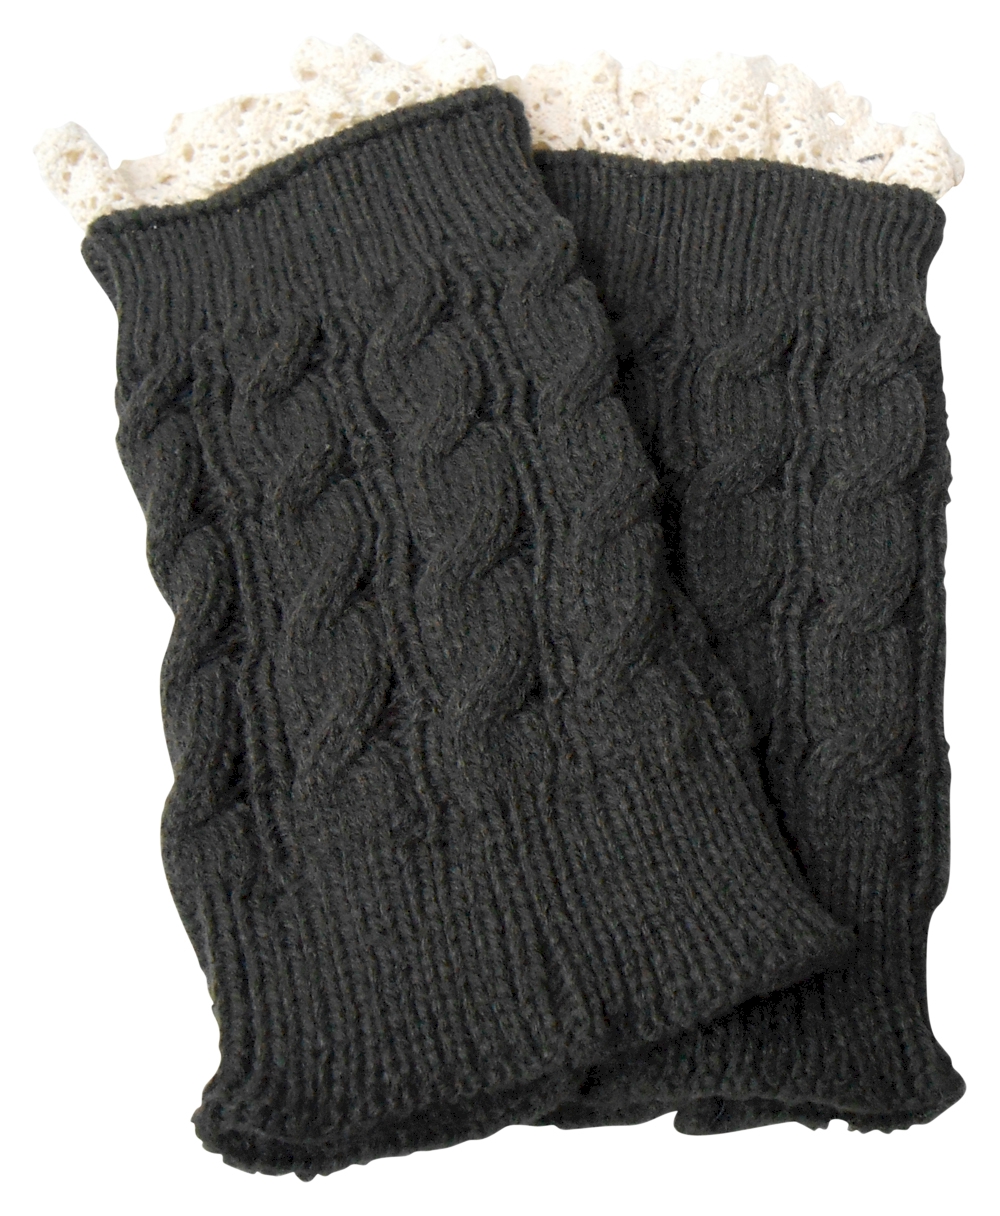 Cable Knit Boot Cuff with Lace Top - DARK GRAY - CLOSEOUT